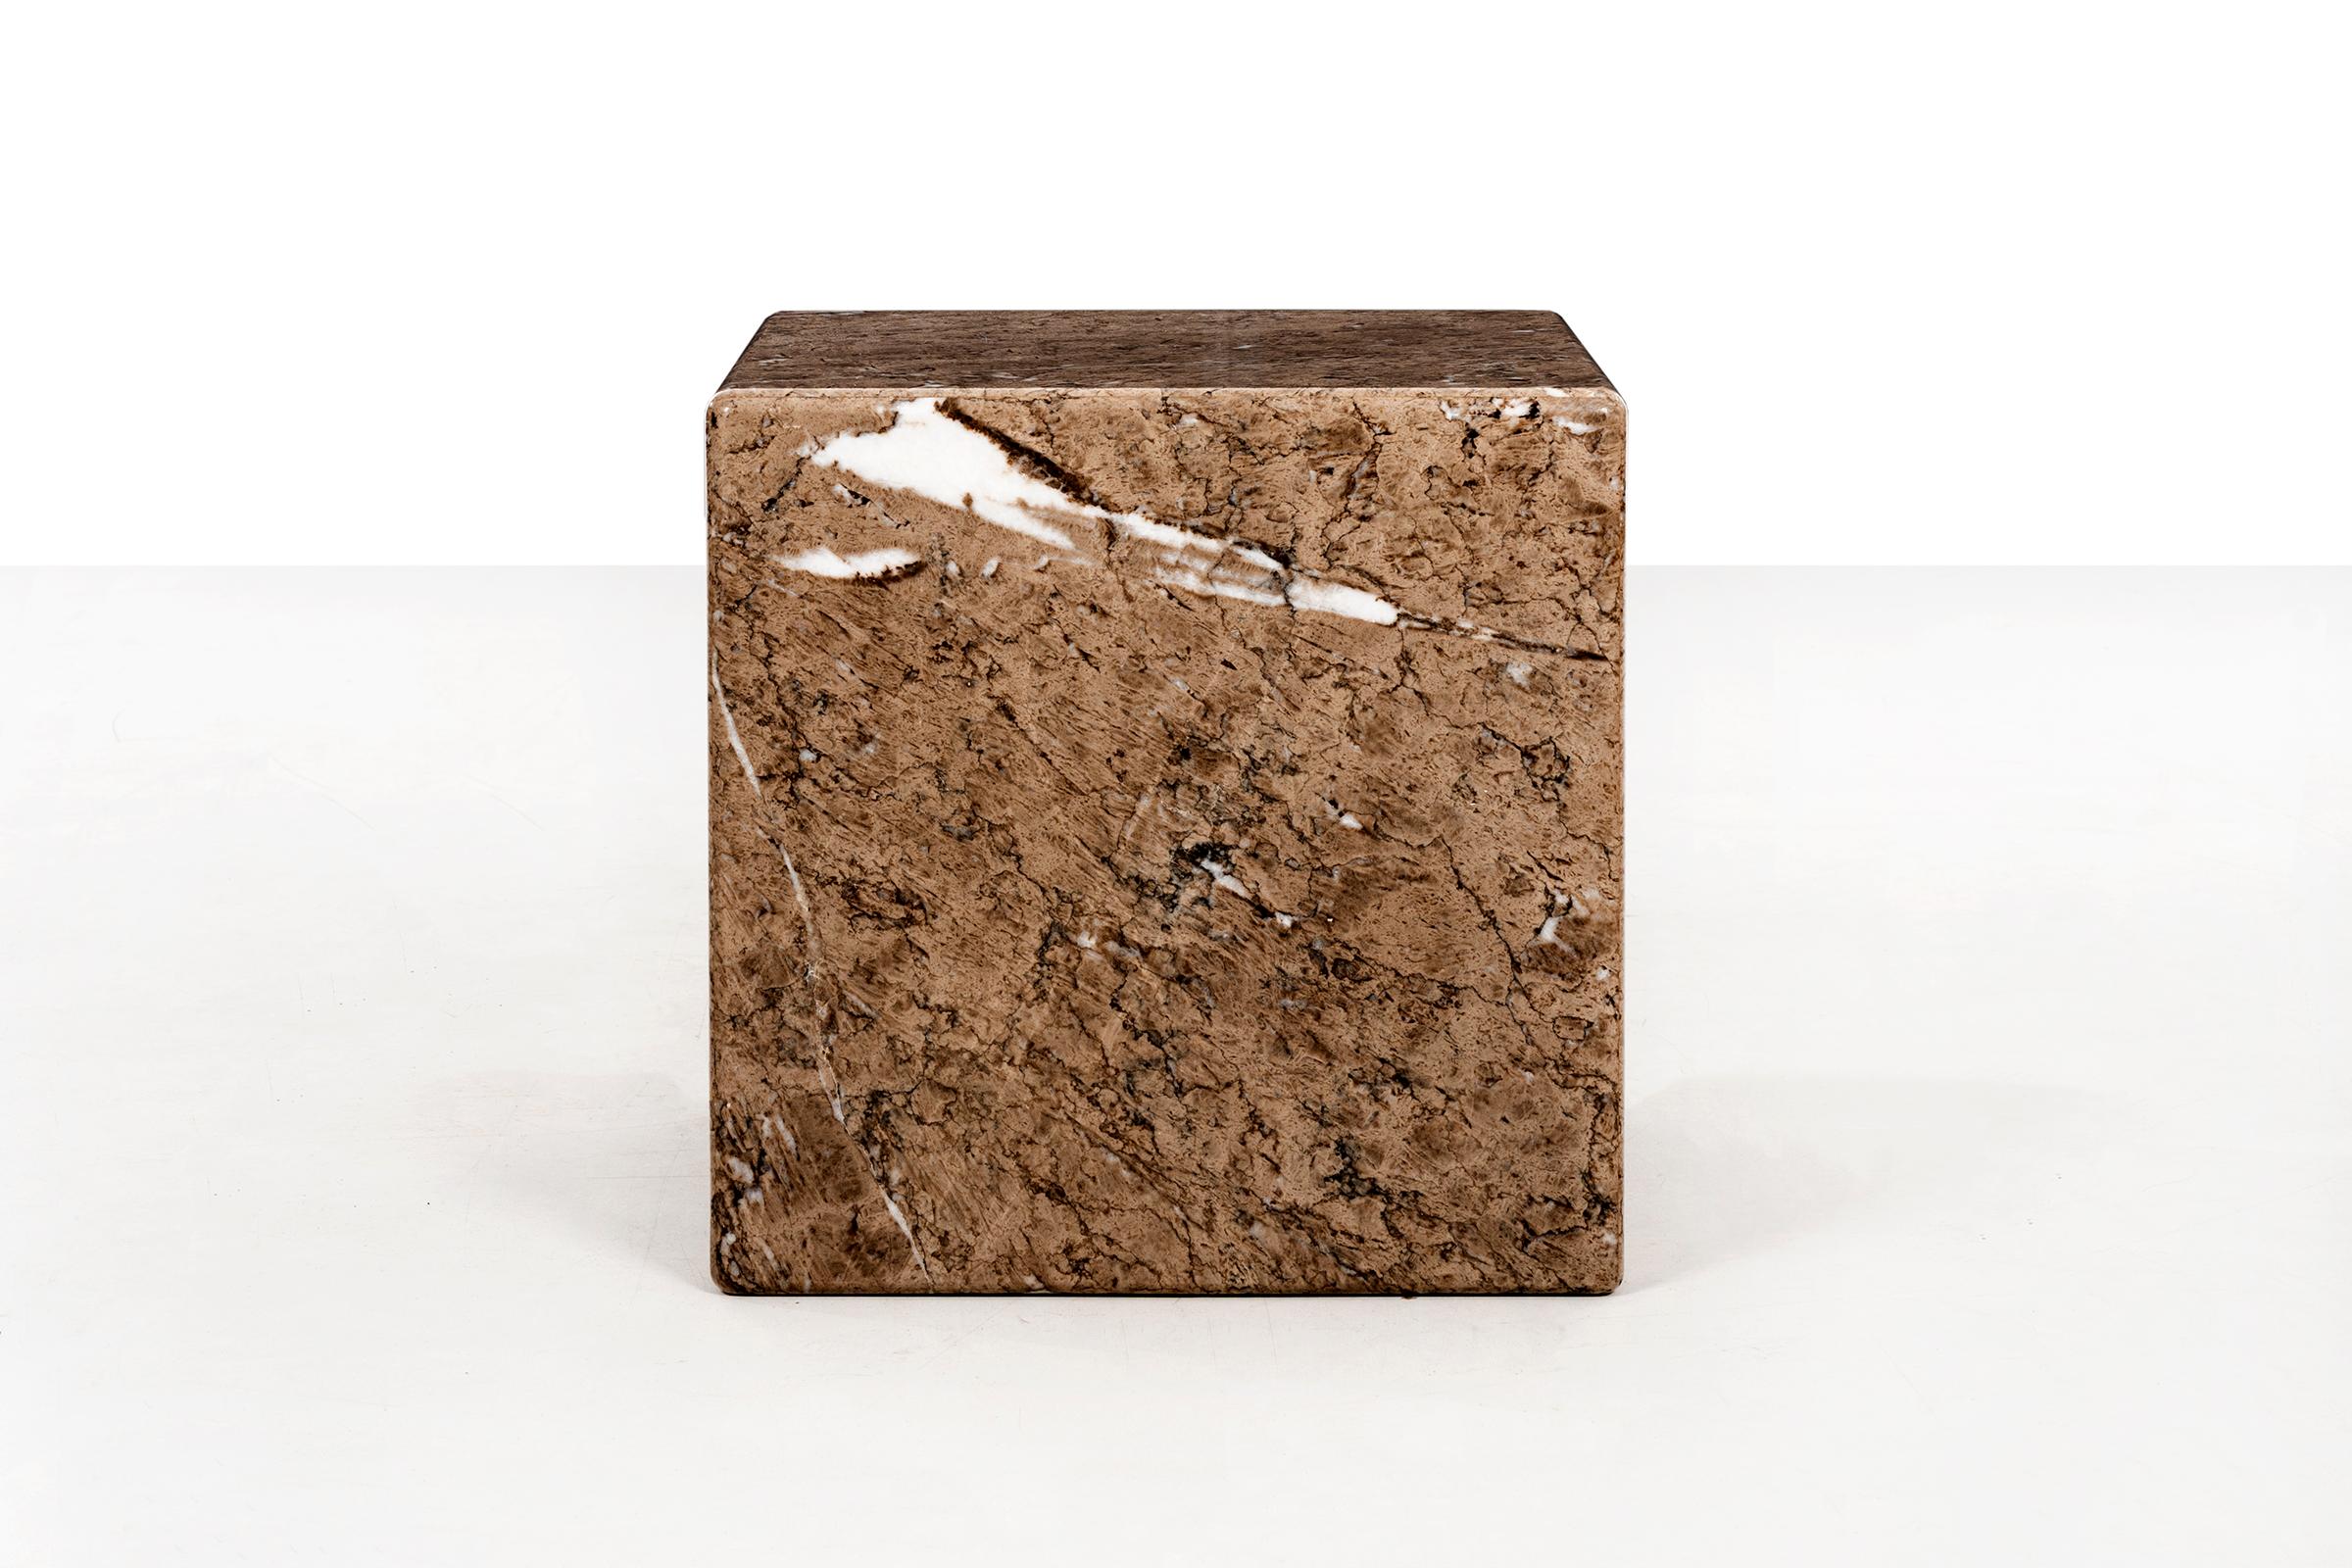 Polished Hugh Acton Marble Cubed End Tables